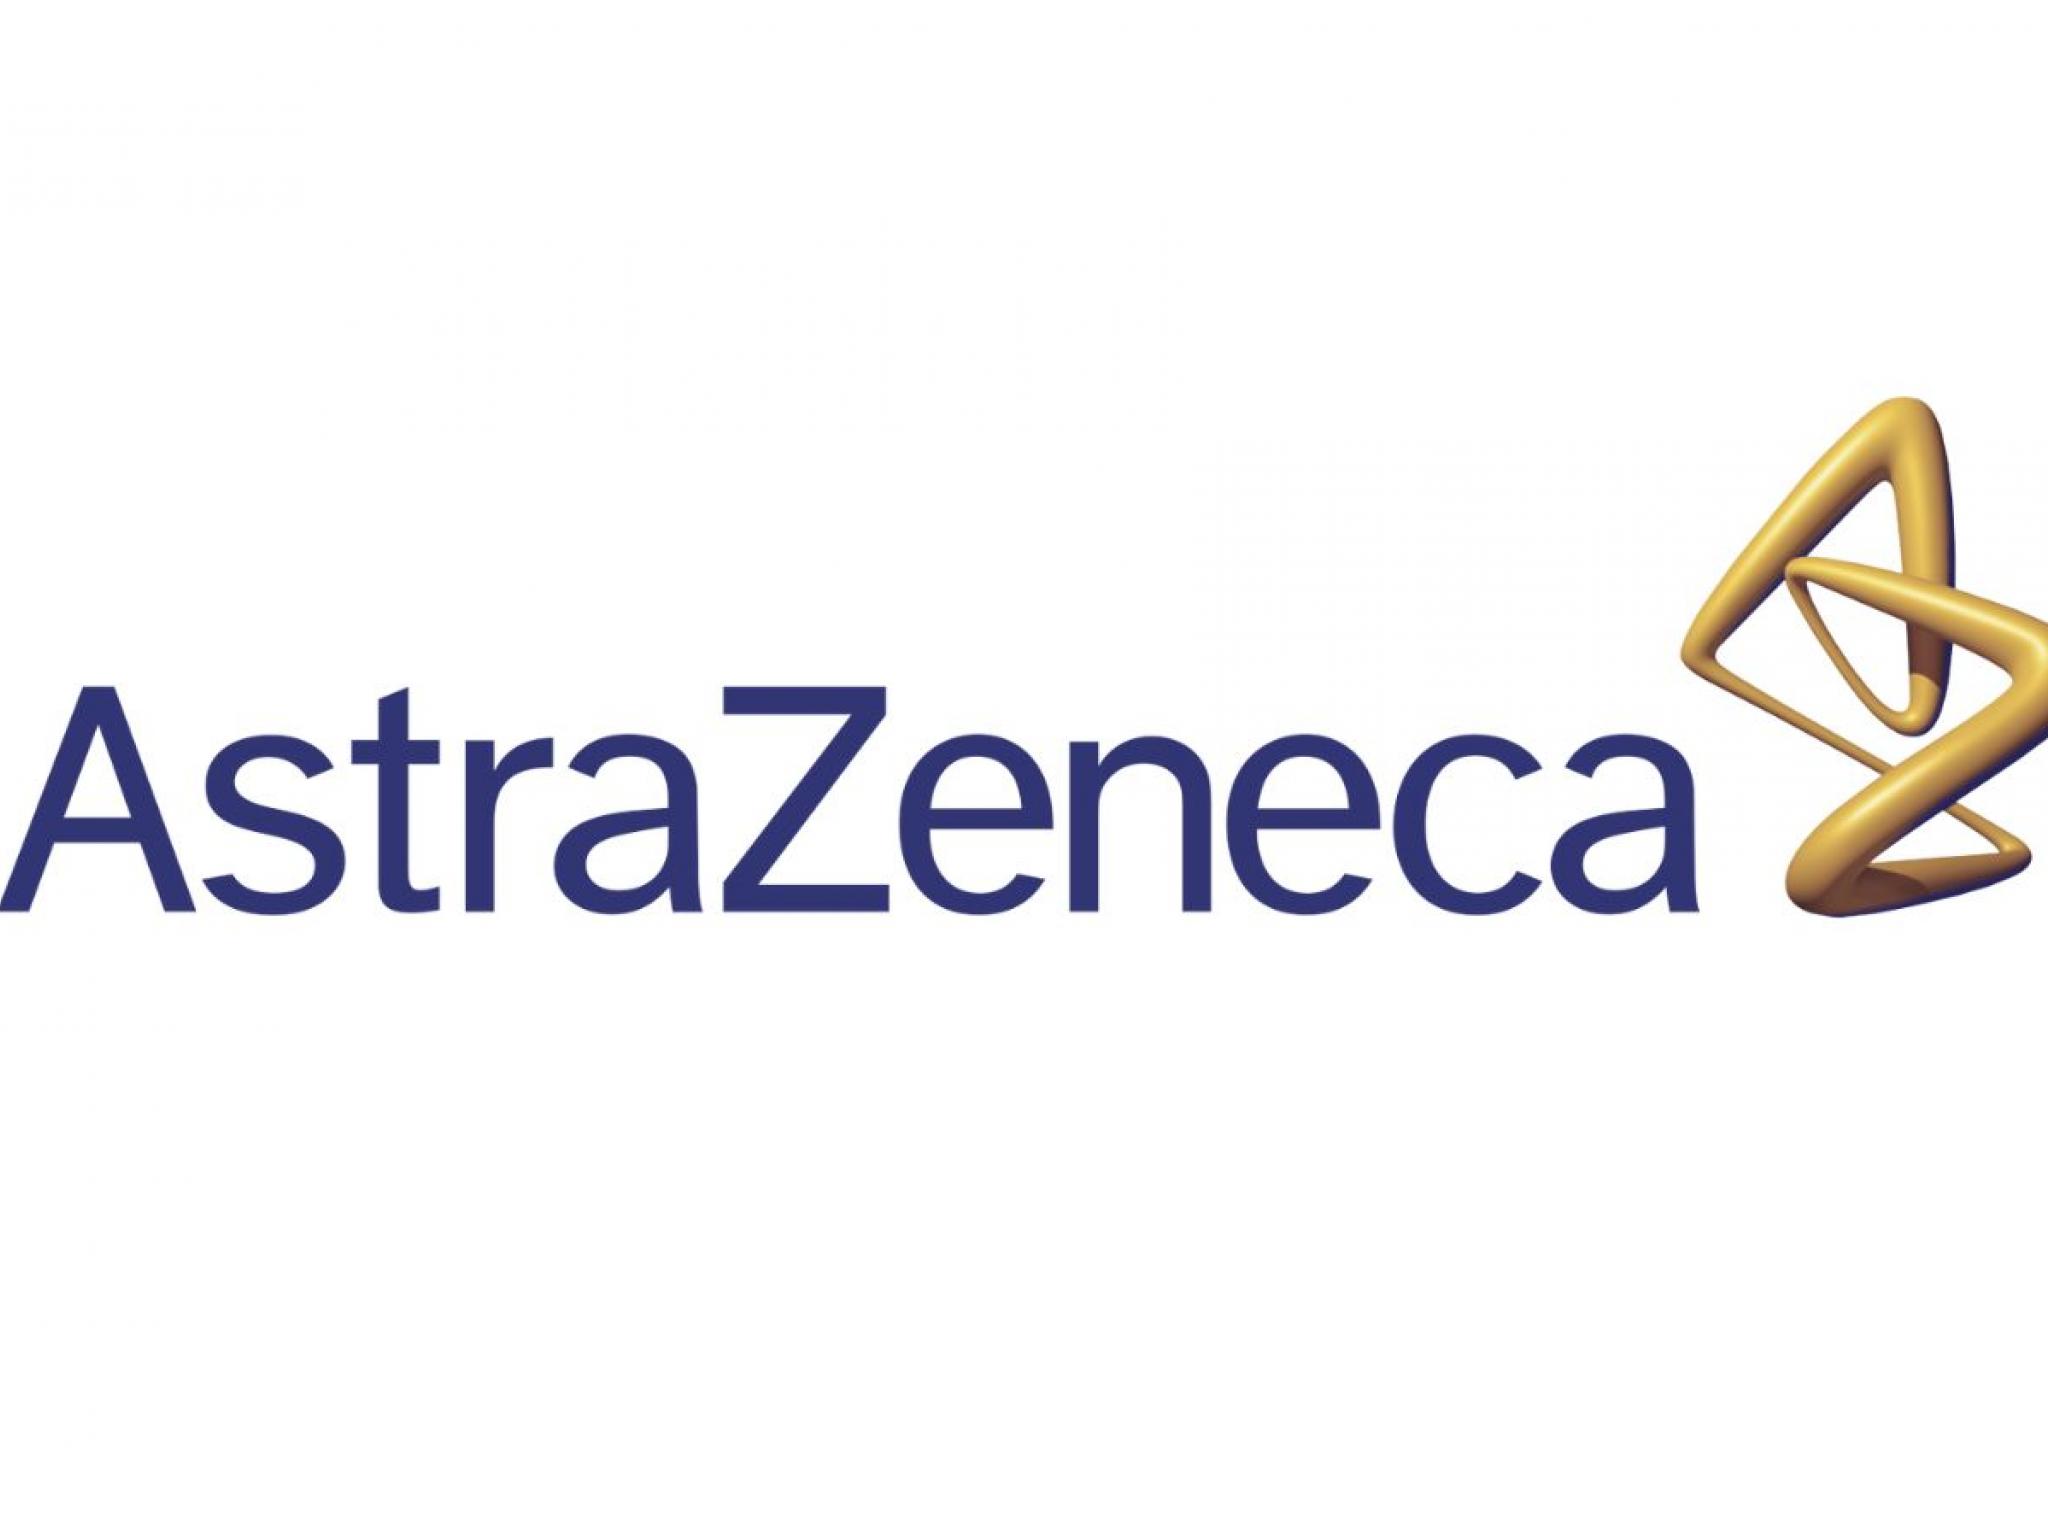  astrazeneca-ecarx-holdings-and-other-big-stocks-moving-lower-on-monday 